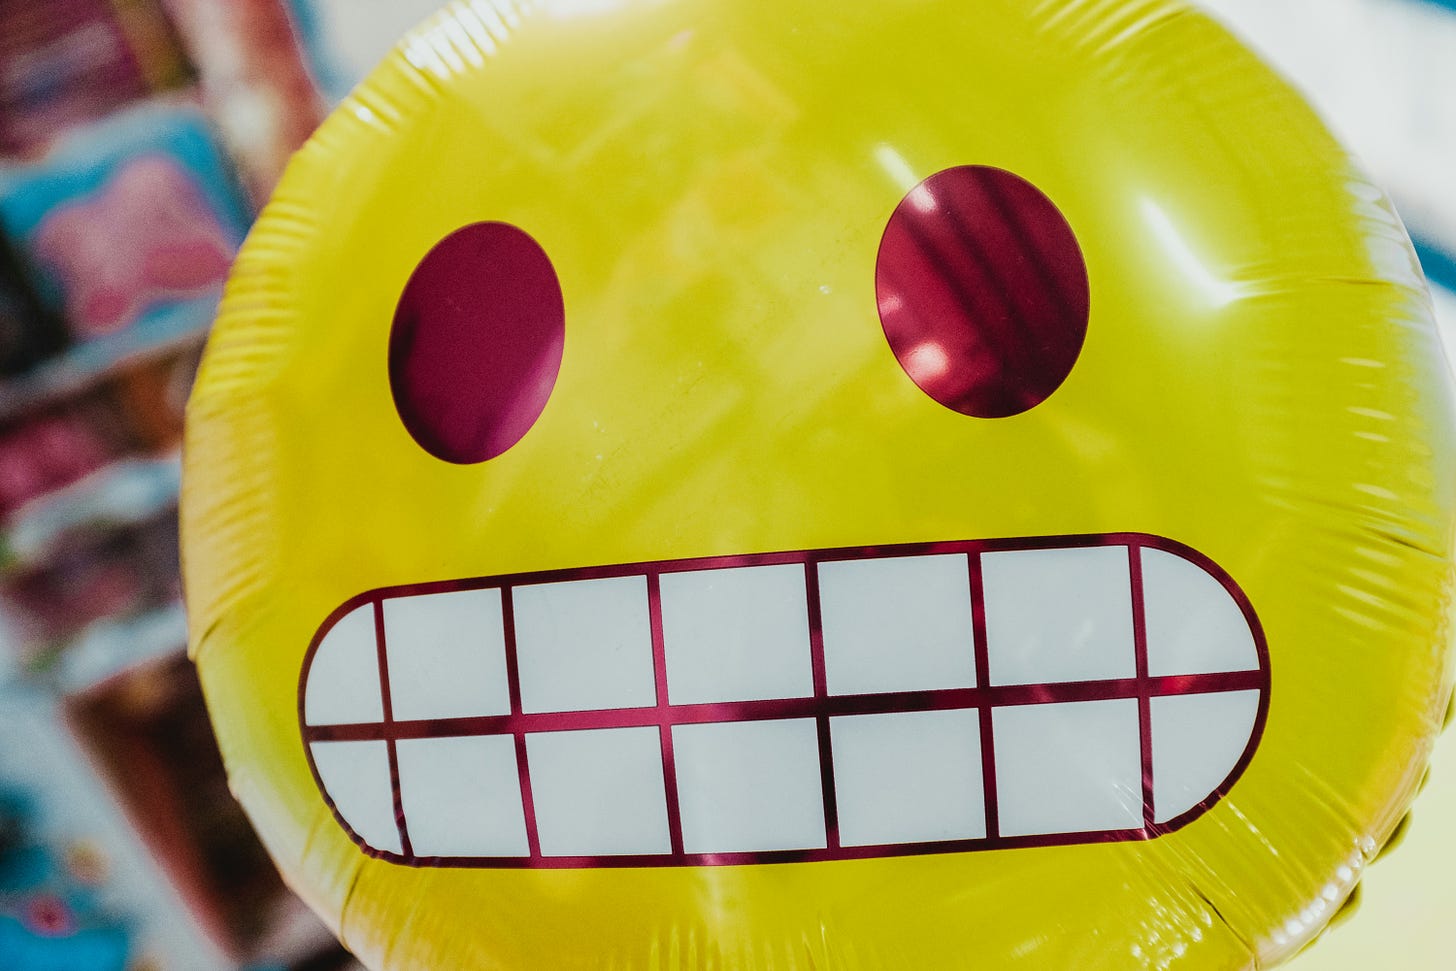 a large inflatable emoji with a grimacing expression